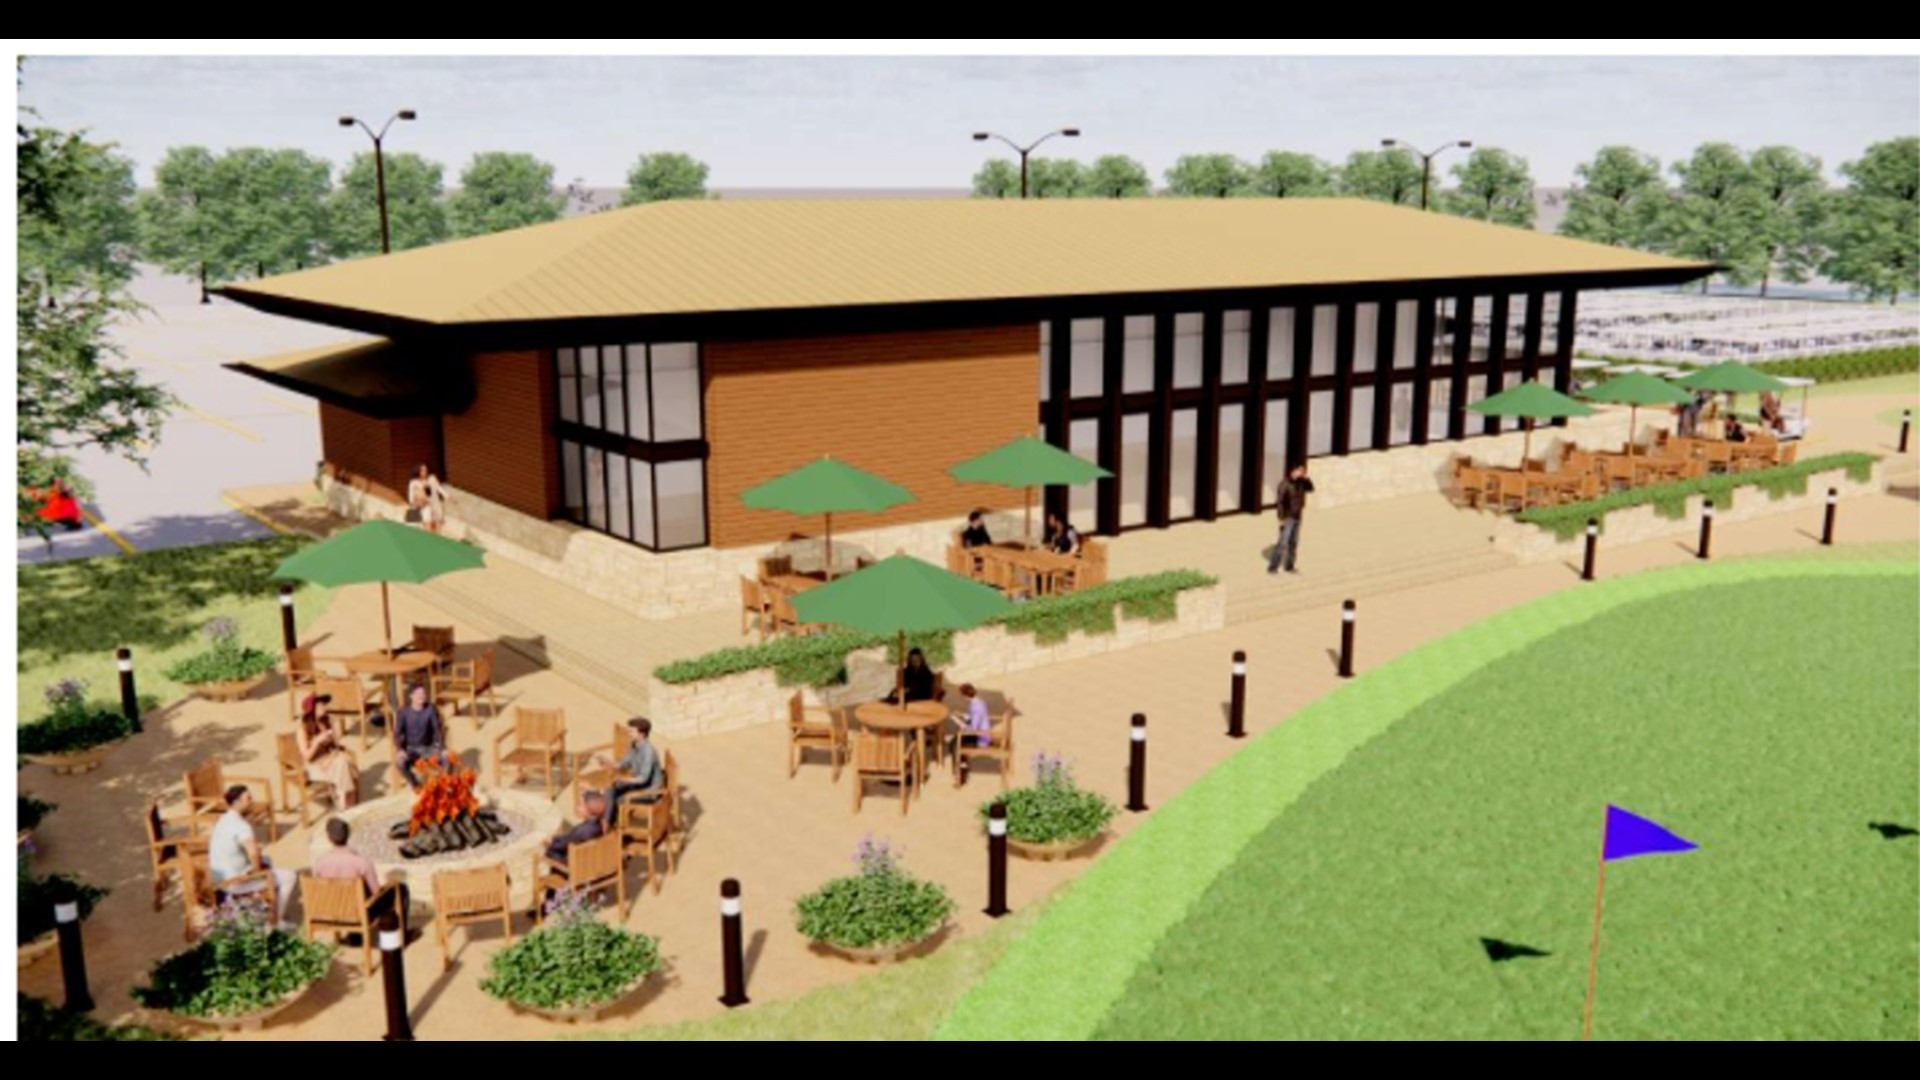 Highland Springs Golf Course in Rock Island is building a new clubhouse, which will include an expansion of its First Tee Quad Cities program